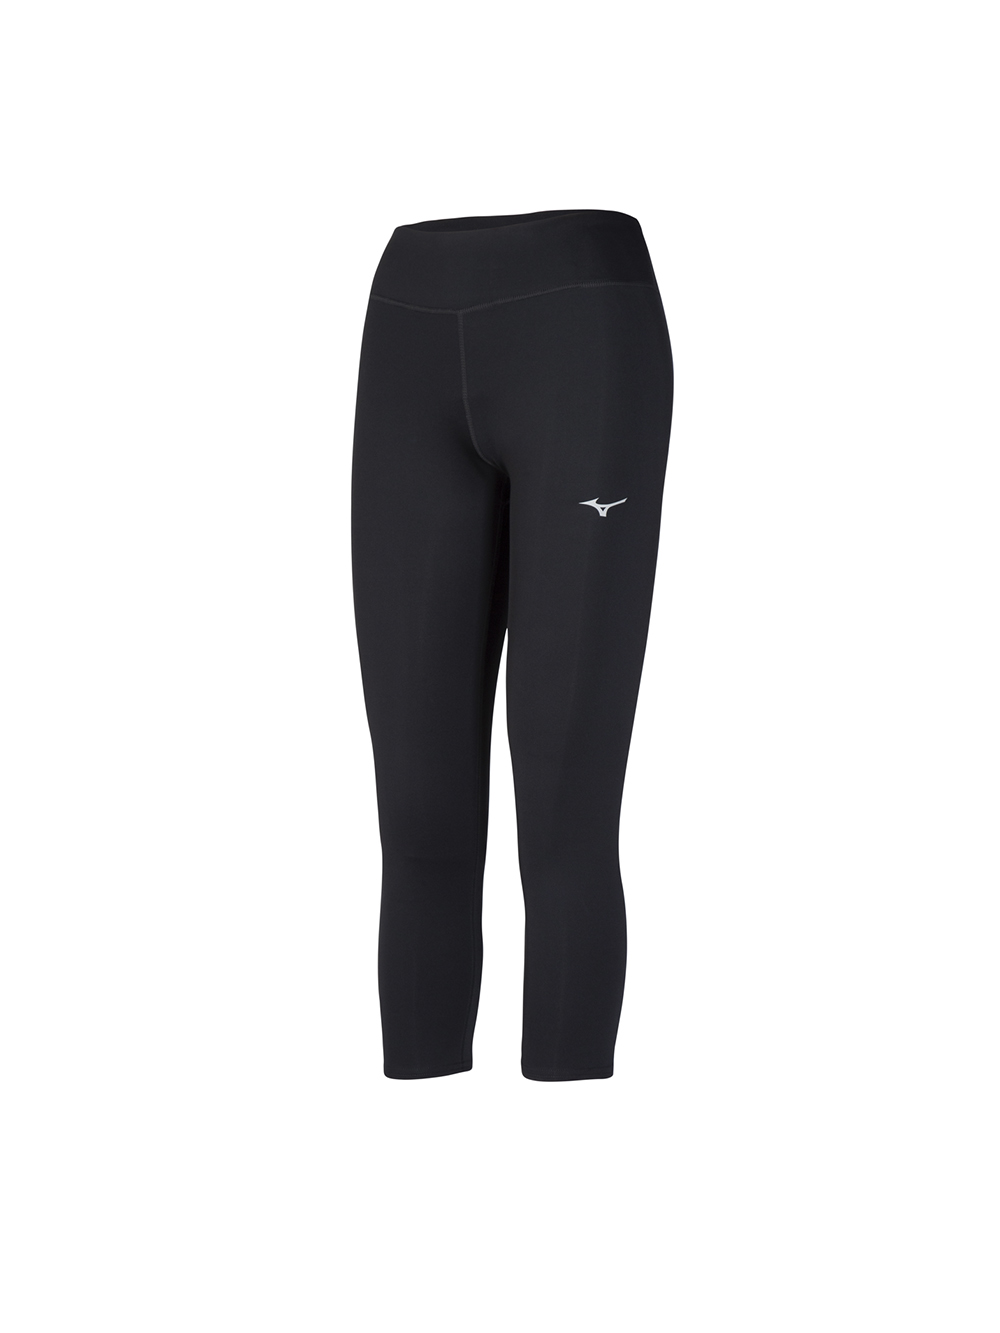 Mizuno Women's 3/4 Length Tight | Midwest Volleyball Warehouse